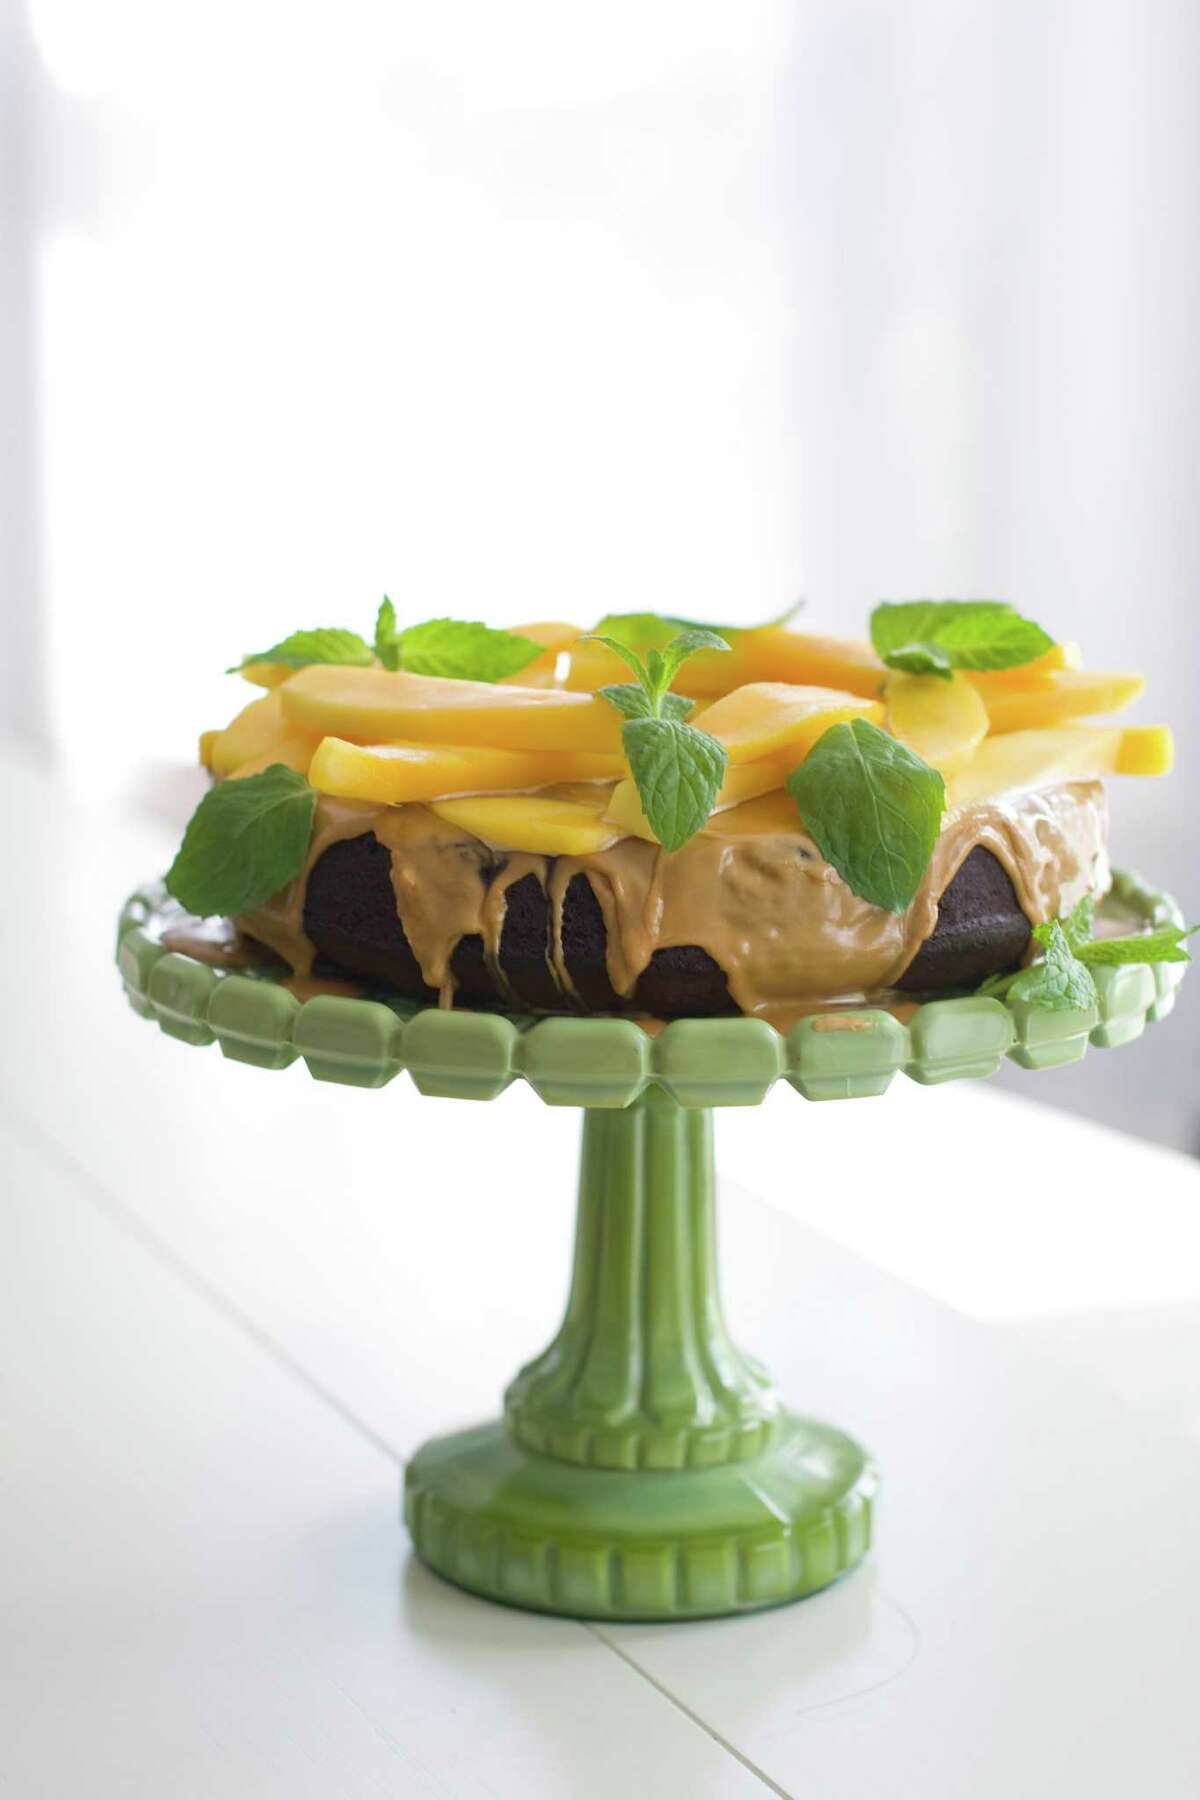 In this image taken on March 26, 2012 a mango-topped chocolate honey cake is seen in Concord, N.H. (AP Photo/Matthew Mead)